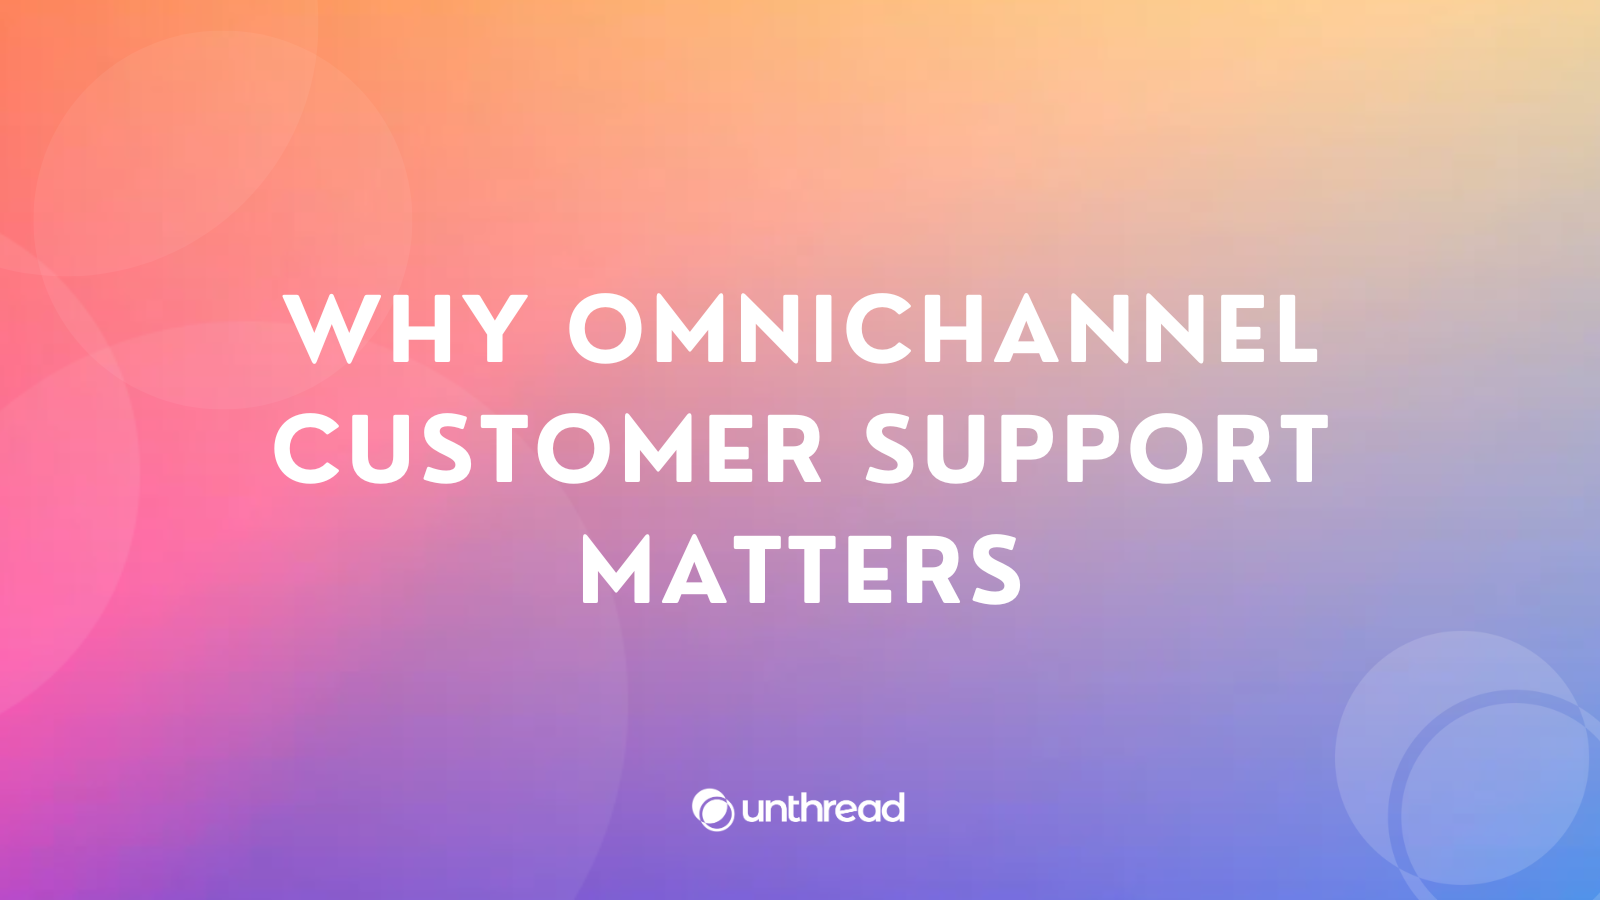 Breaking Down Silos: Why Omnichannel Customer Support Matters